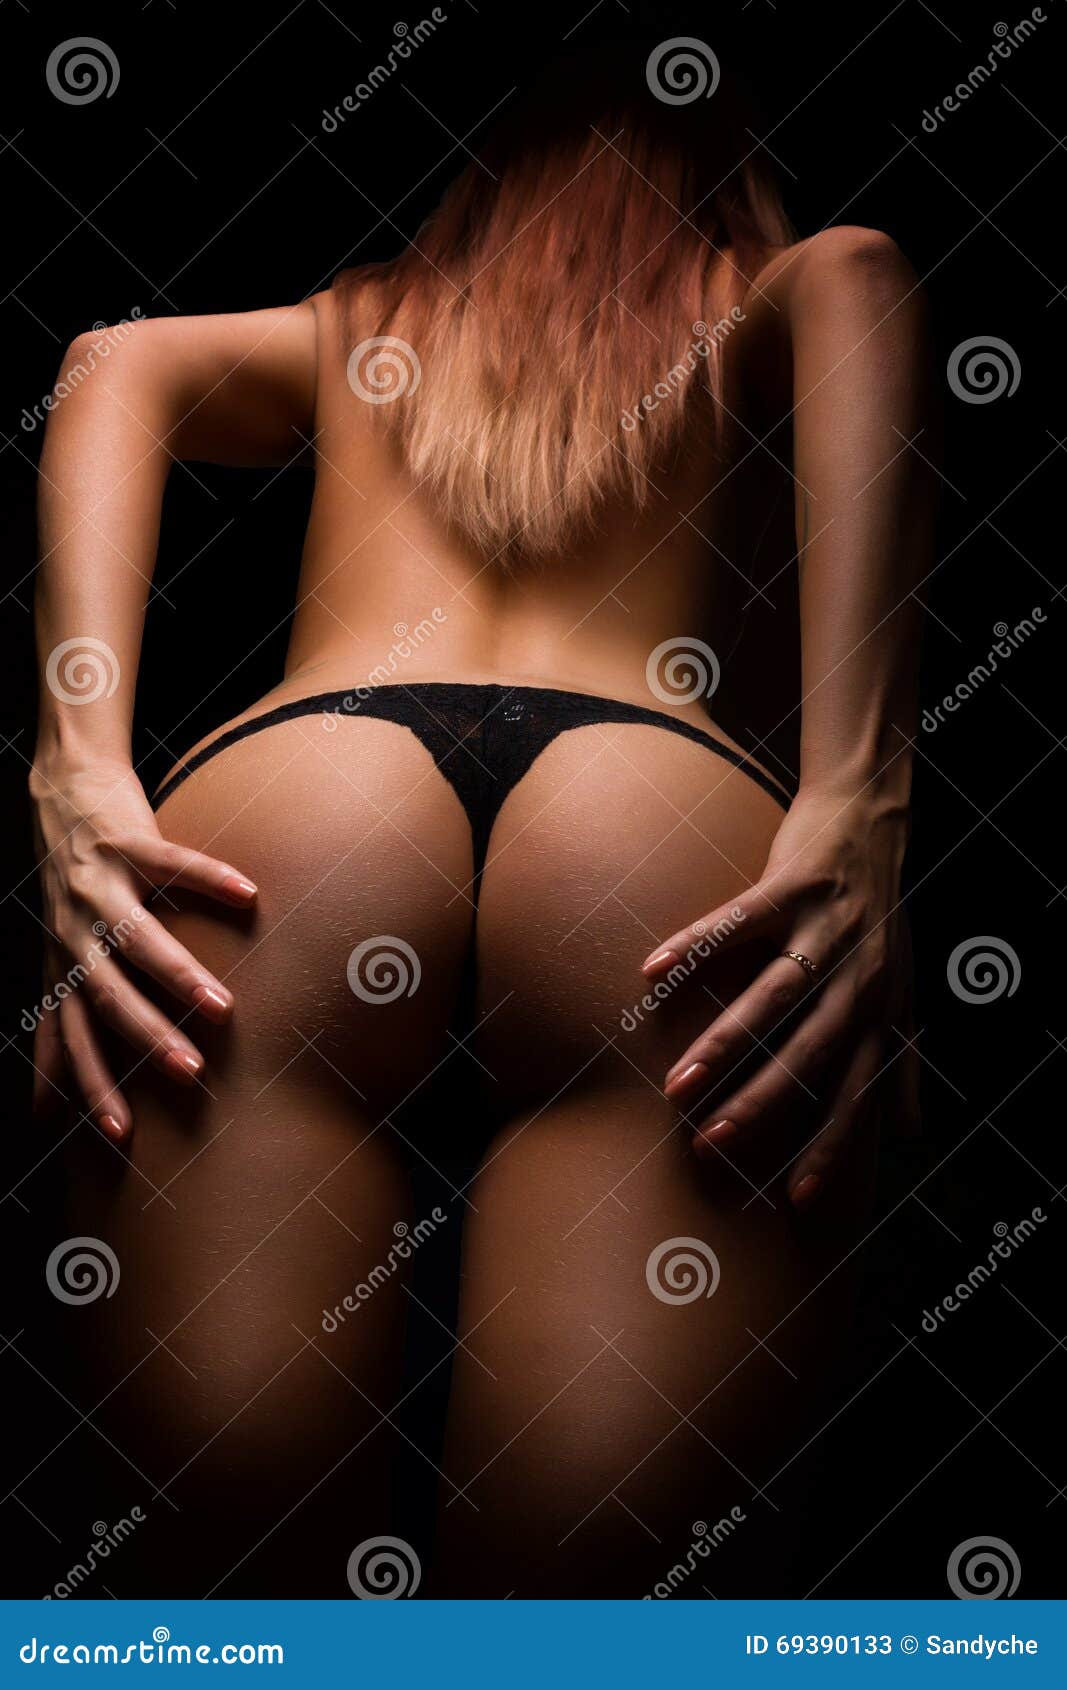 Beauty Girl Takes Off Thong Panties, Showing Sexy Ass. Back View, Big  Window On The Background. Stock Photo, Picture and Royalty Free Image.  Image 70704443.